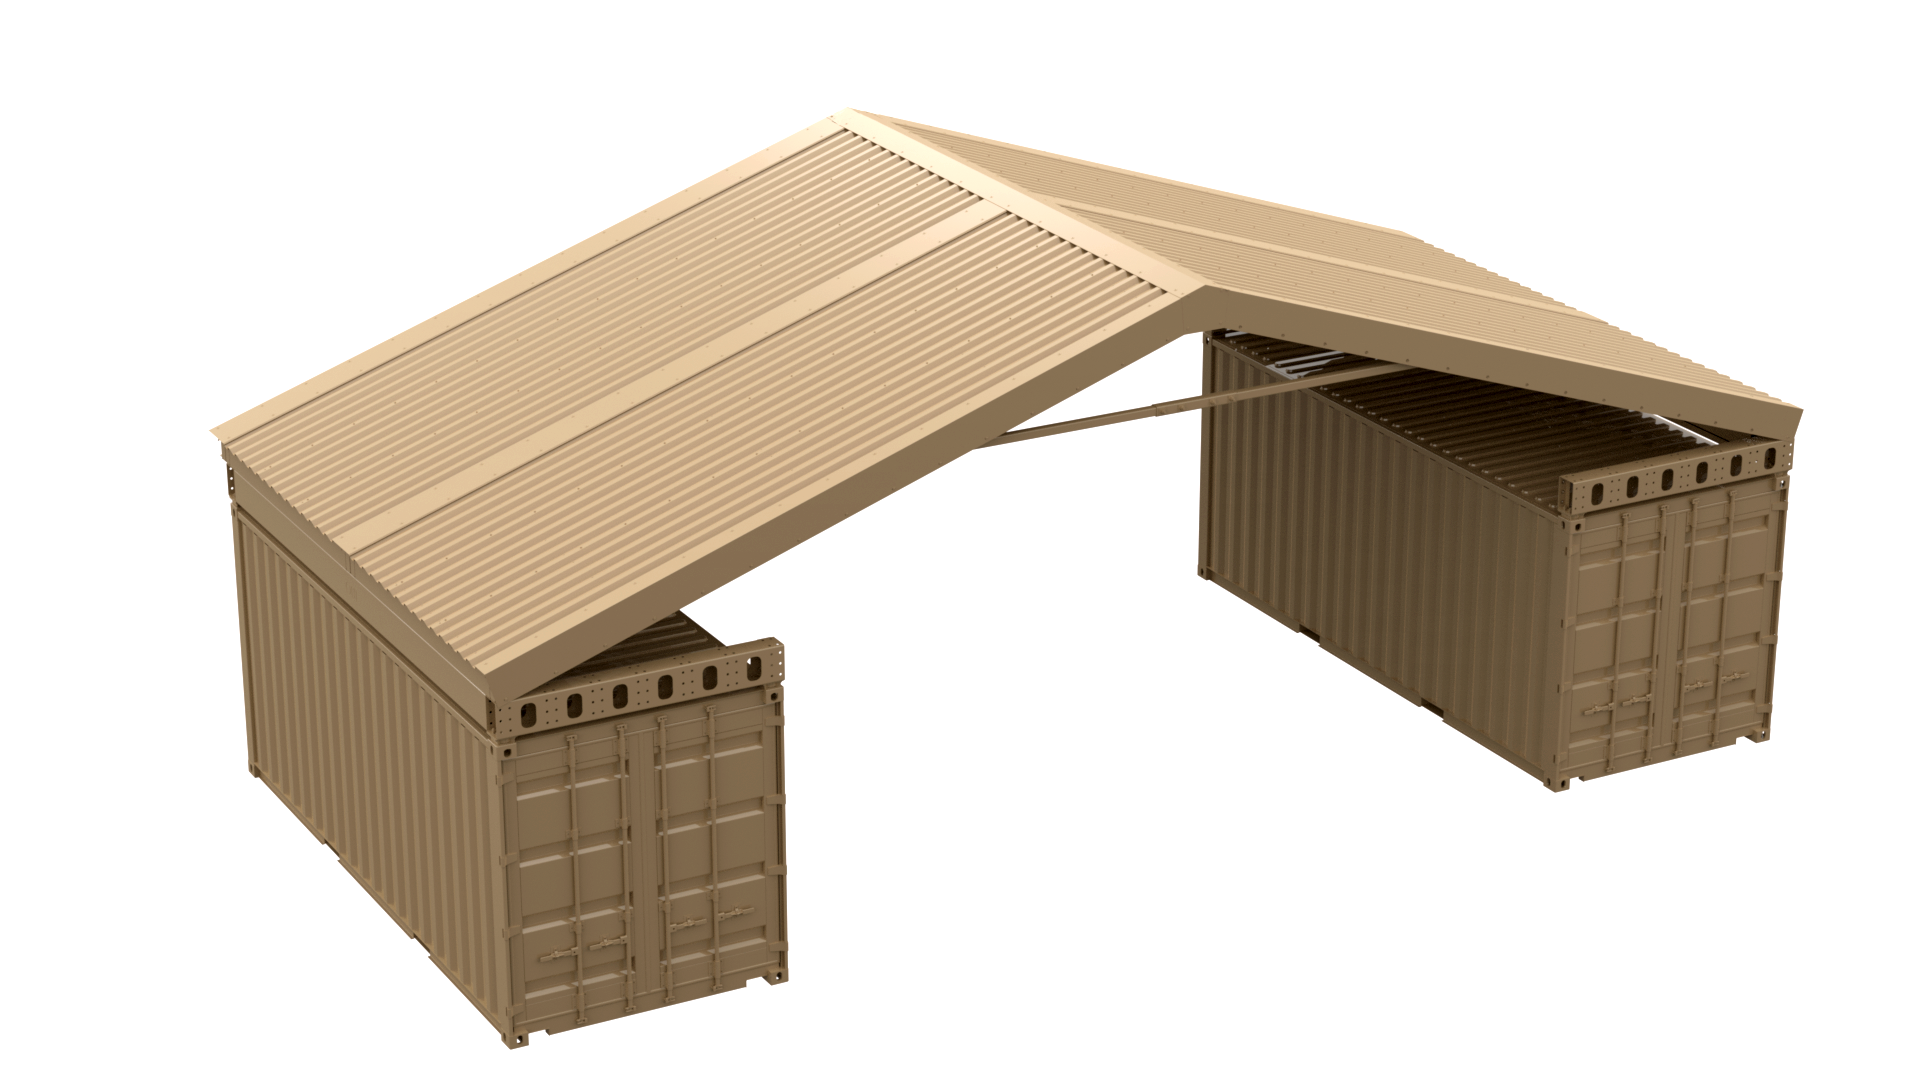  CTR-3.0-4011 x 20’ containers under roof 